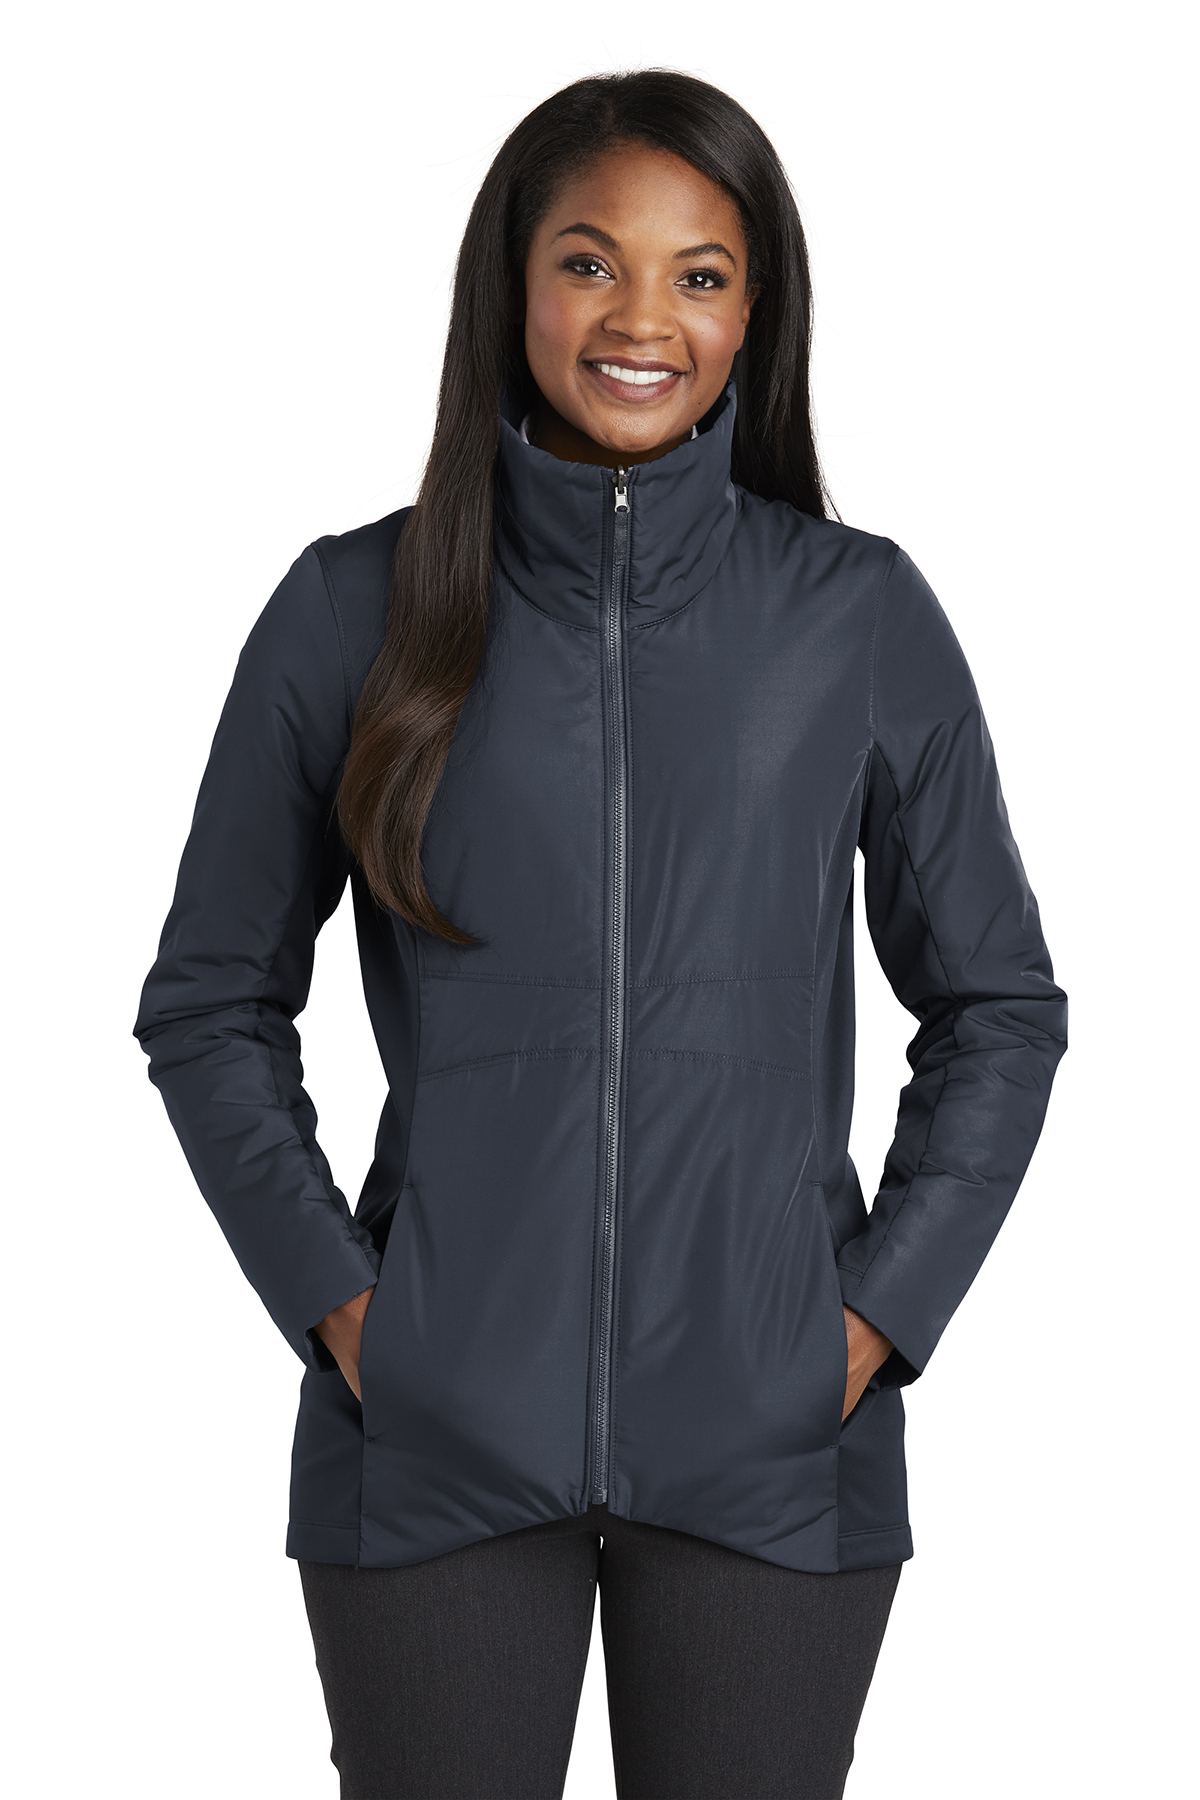 Port Authority Ladies Collective Insulated Jacket | Product | SanMar